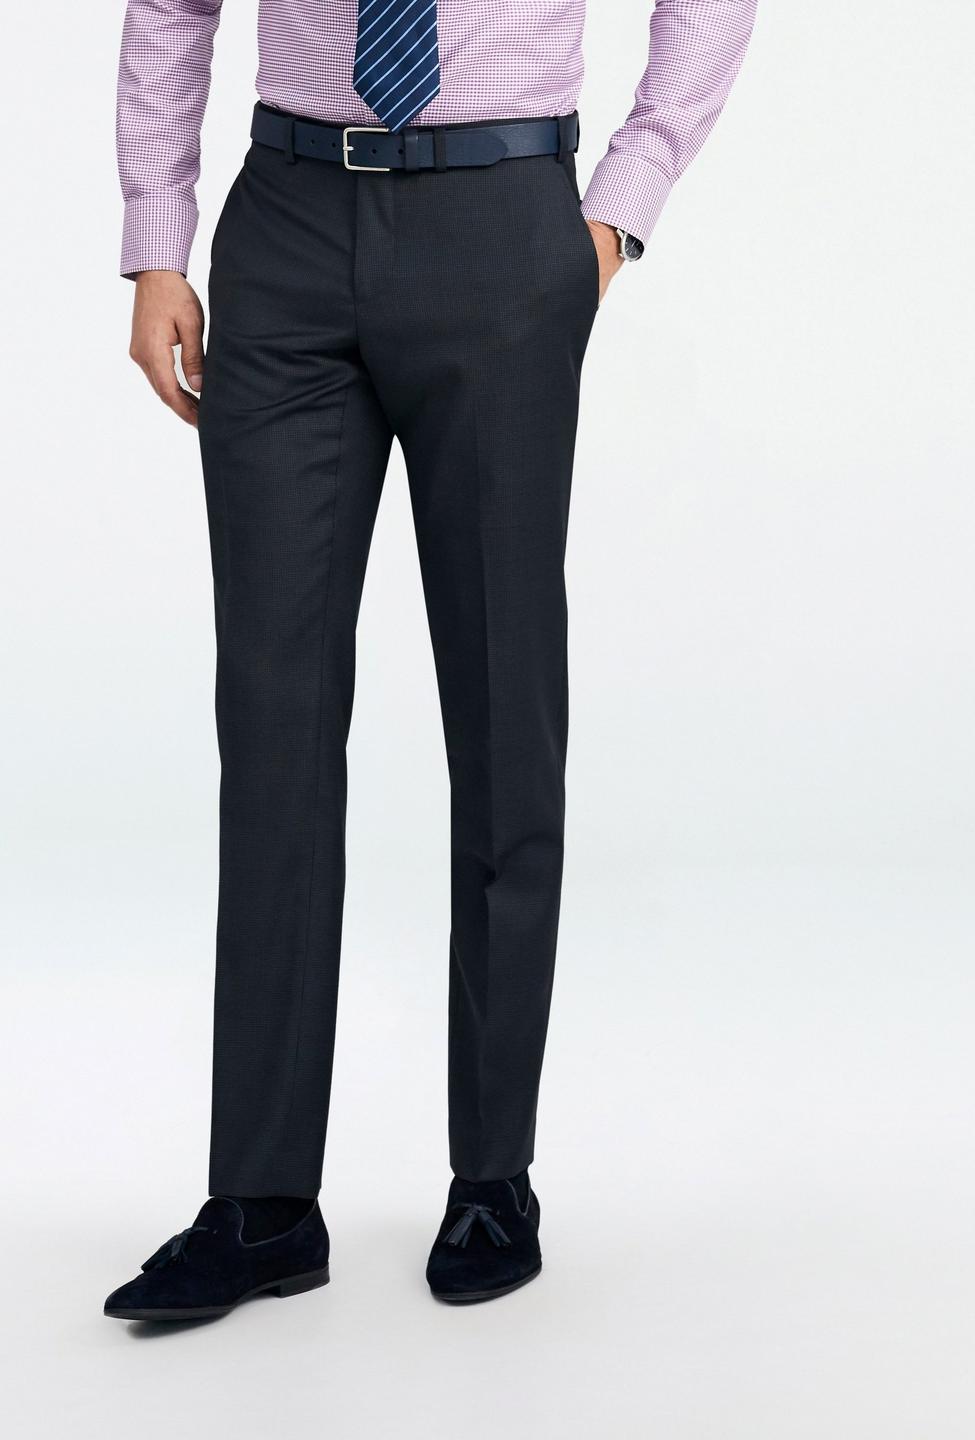 Gray pants - Malvern Houndstooth Design from Seasonal Indochino Collection